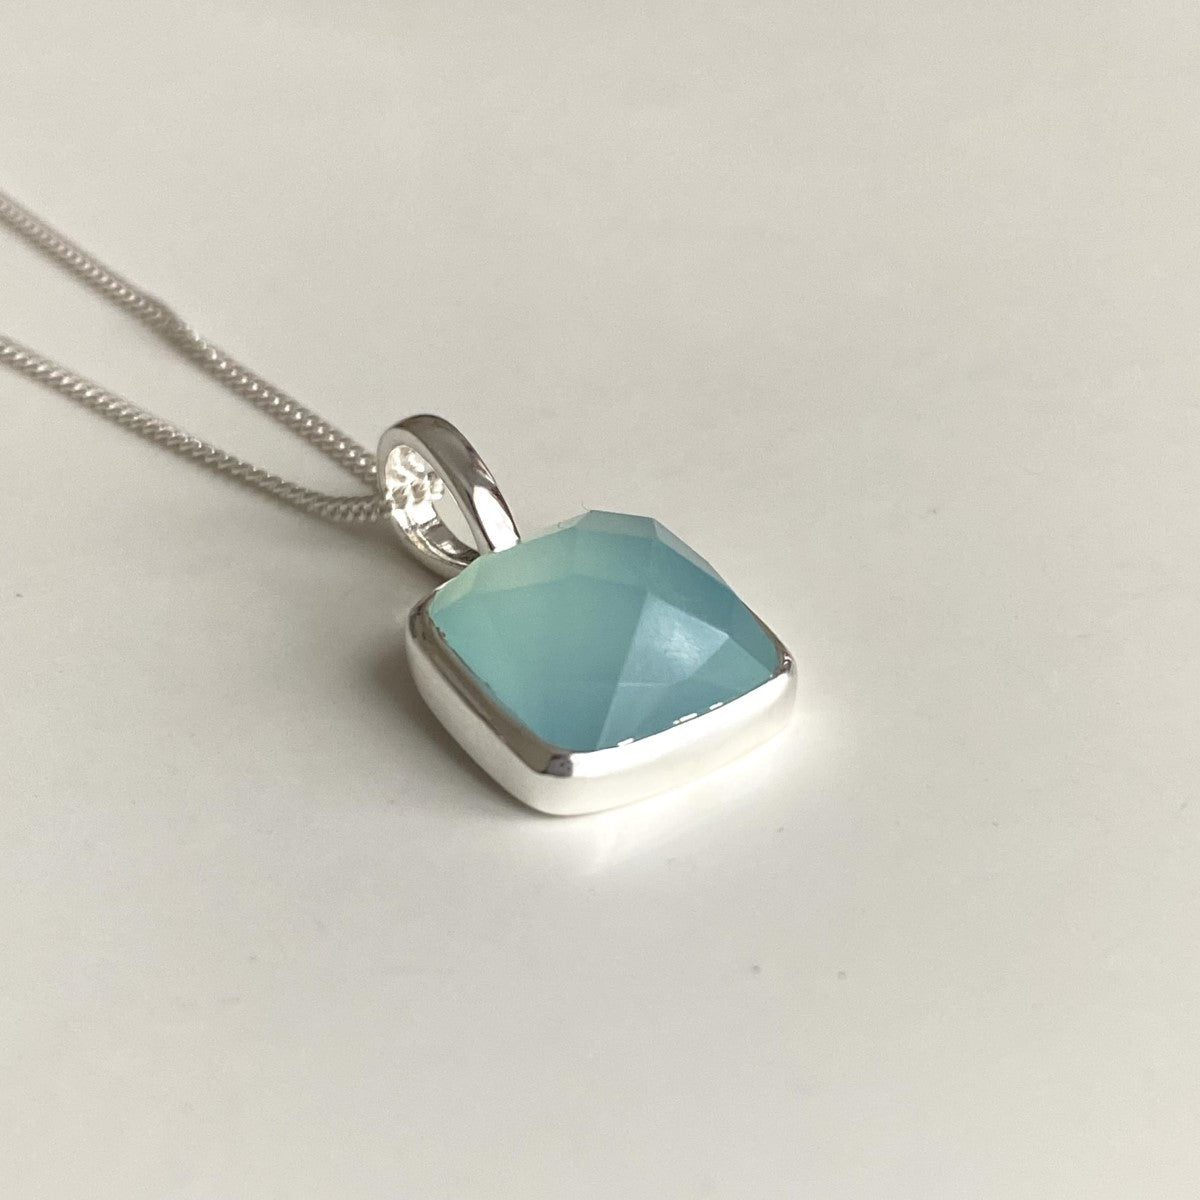 Sterling Silver Pendant Necklace with a Faceted Square Gemstone - Aqua Chalcedony